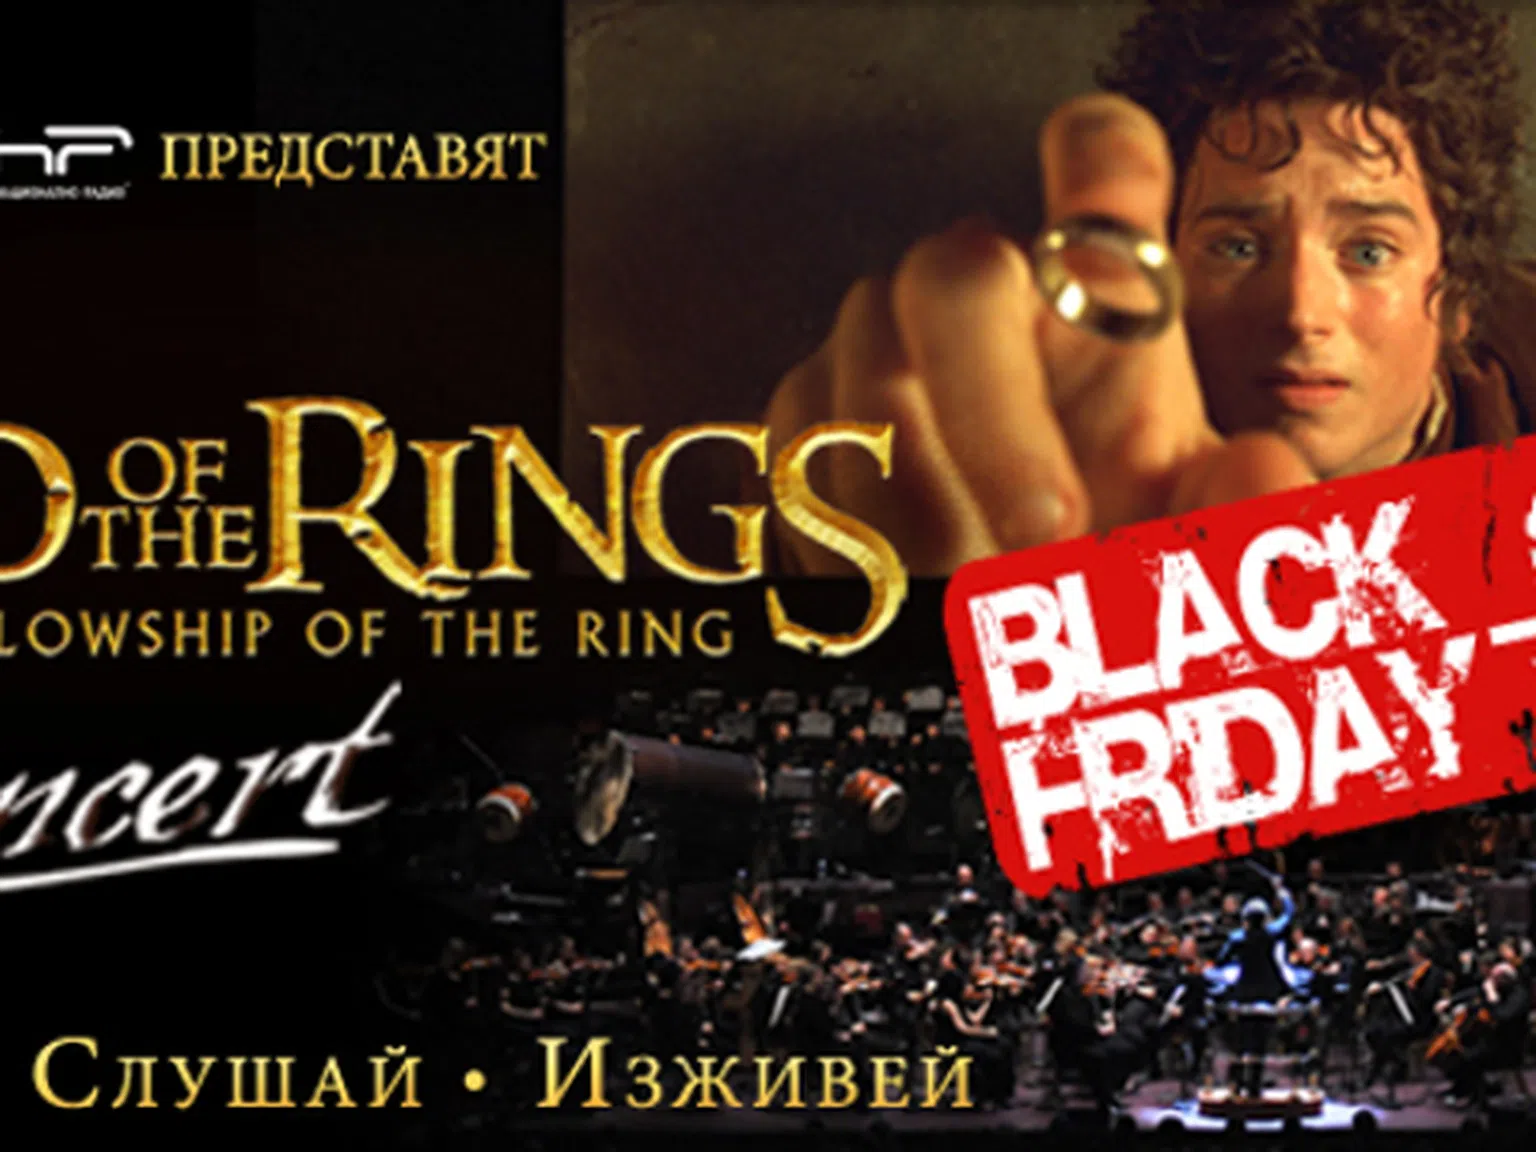 Lord of the Rings in Concert със специална оферта за Black Friday